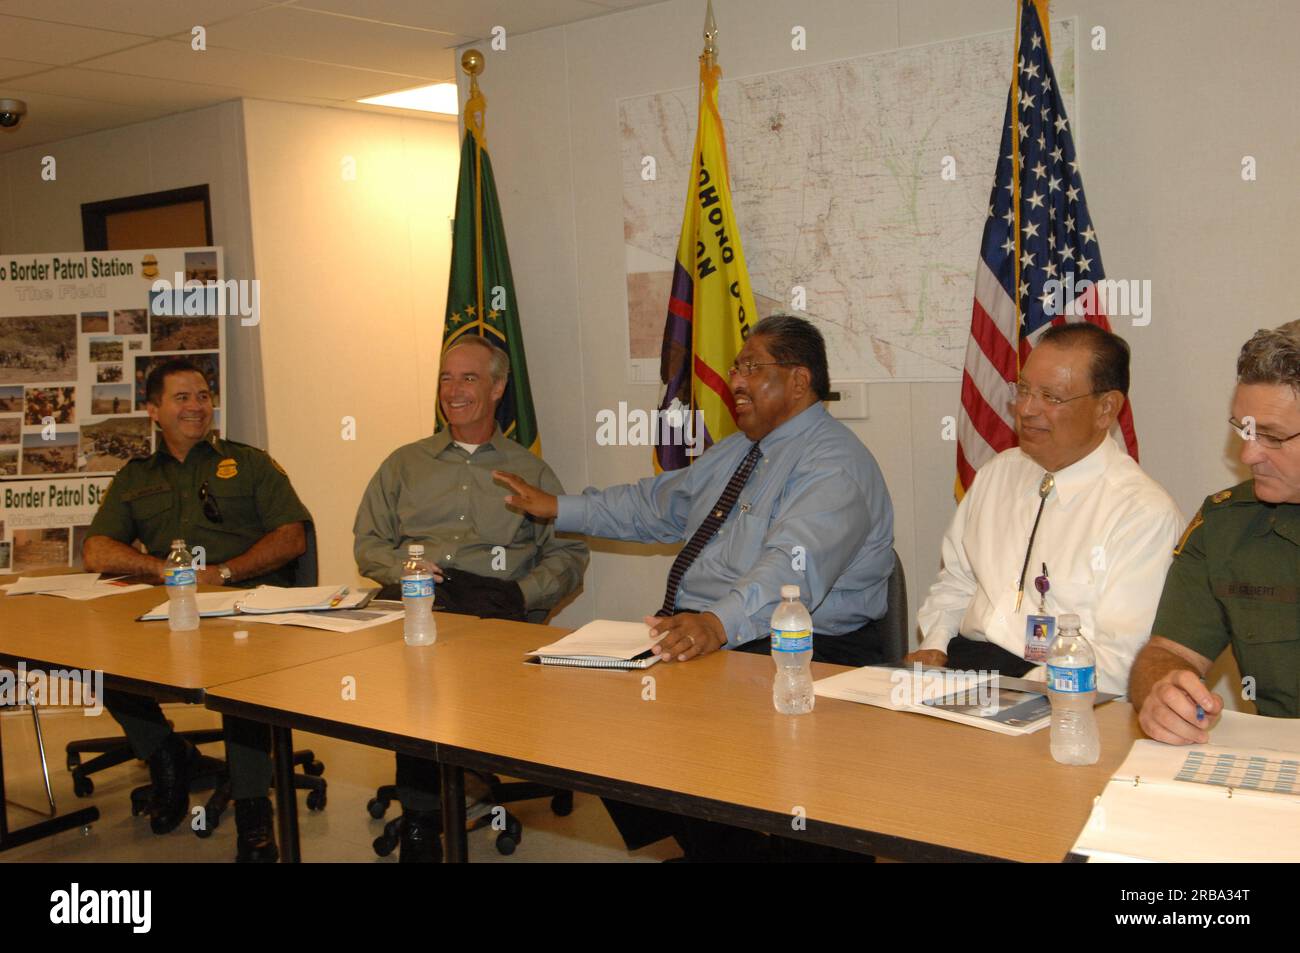 Visit of Secretary Dirk Kempthorne to Pima County, Arizona's border area with Mexico, for tours, discussions with Bureau of Indian Affairs staff and U.S. Customs and Border Protection personnel meeting at the Ajo Border Patrol Station Stock Photo